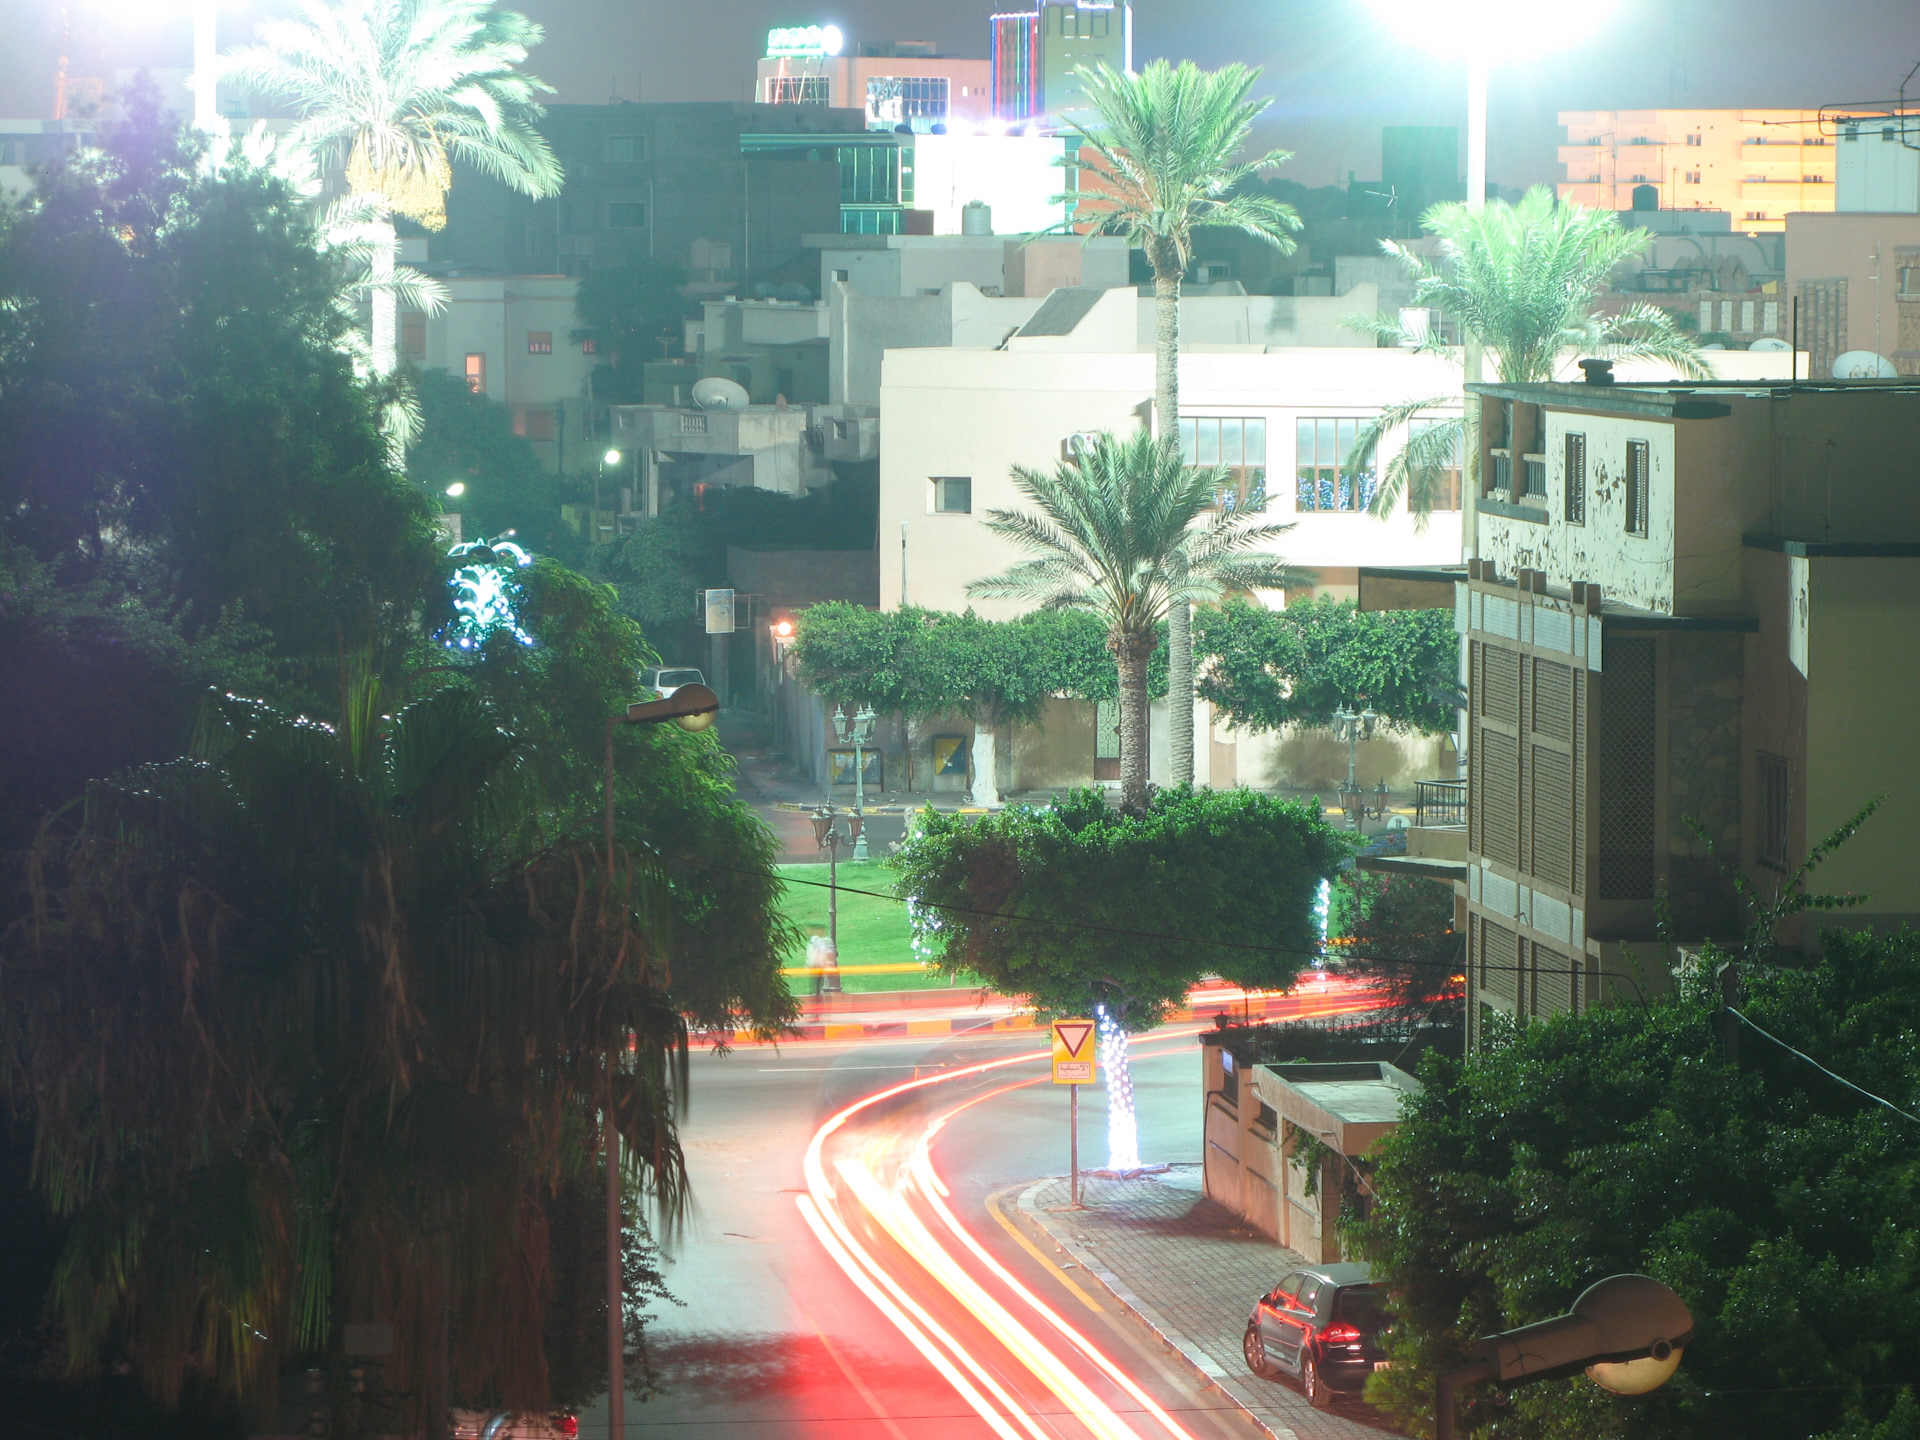 View to roundabout, Kahled Bin Walid Street. 2009, C-Type print.